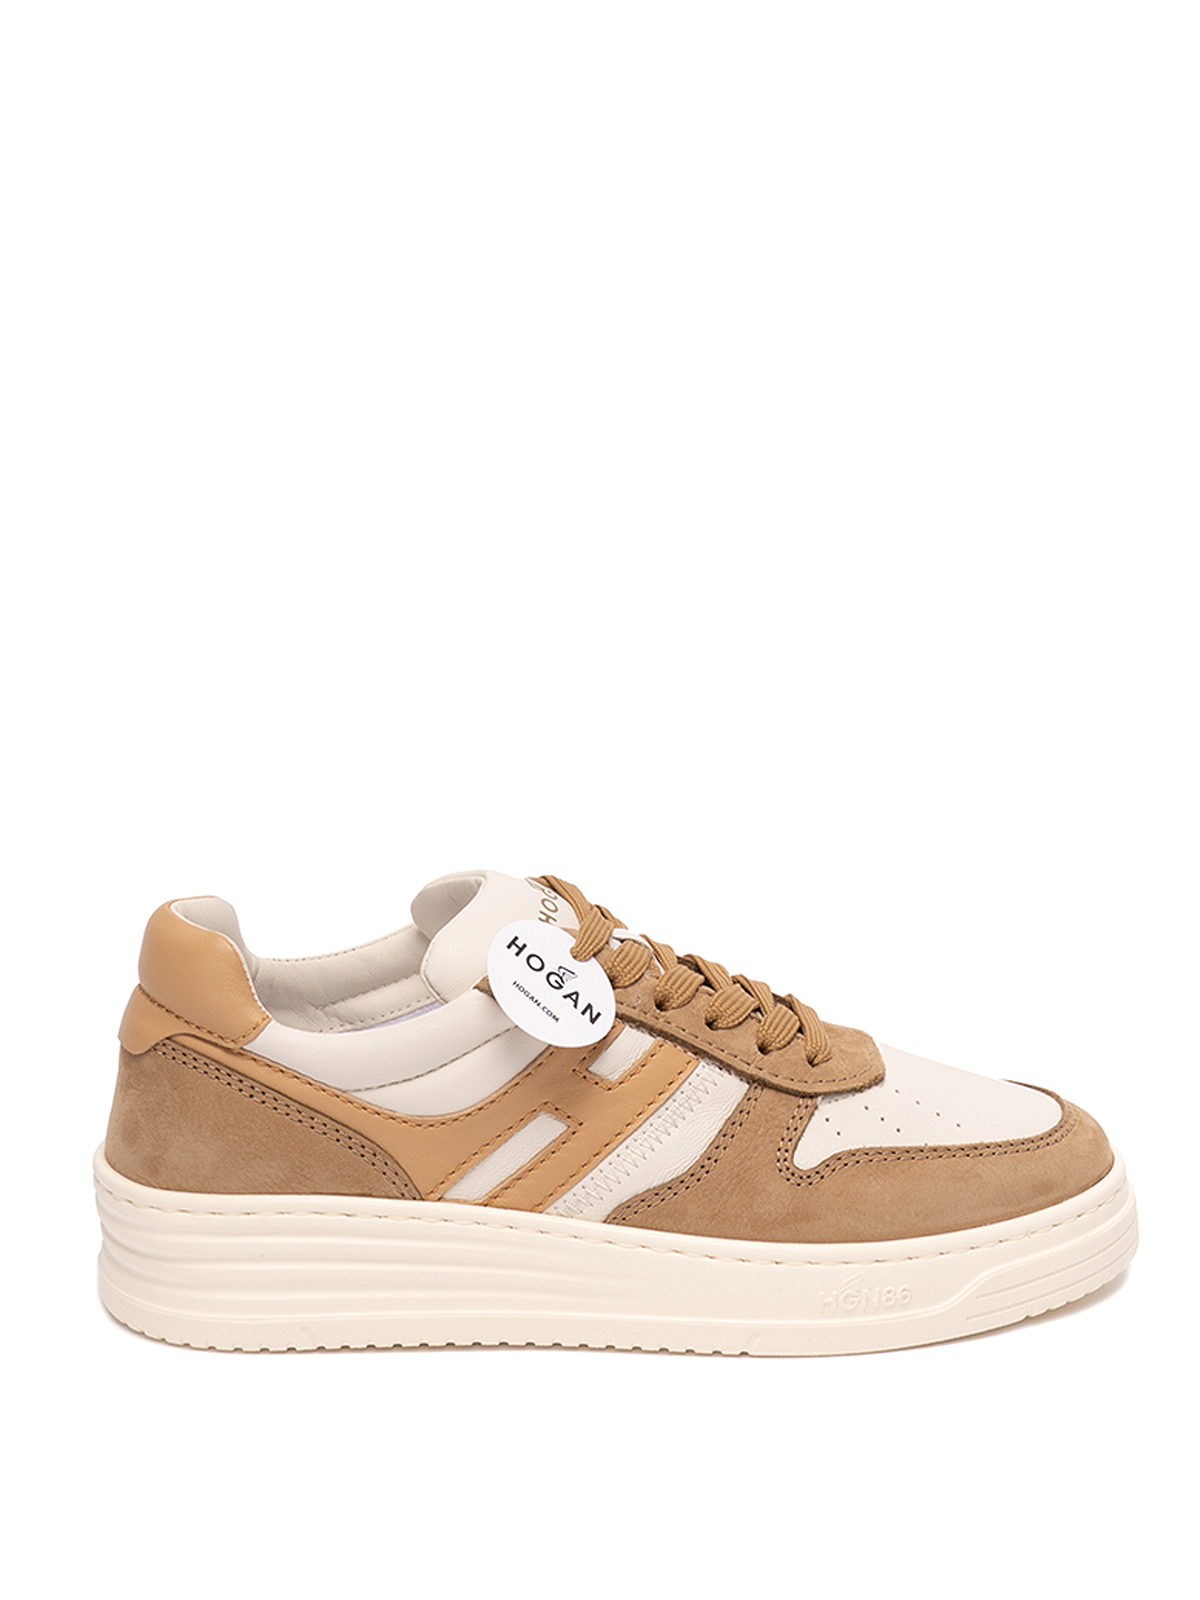 HOGAN `H630` LEATHER SNEAKERS